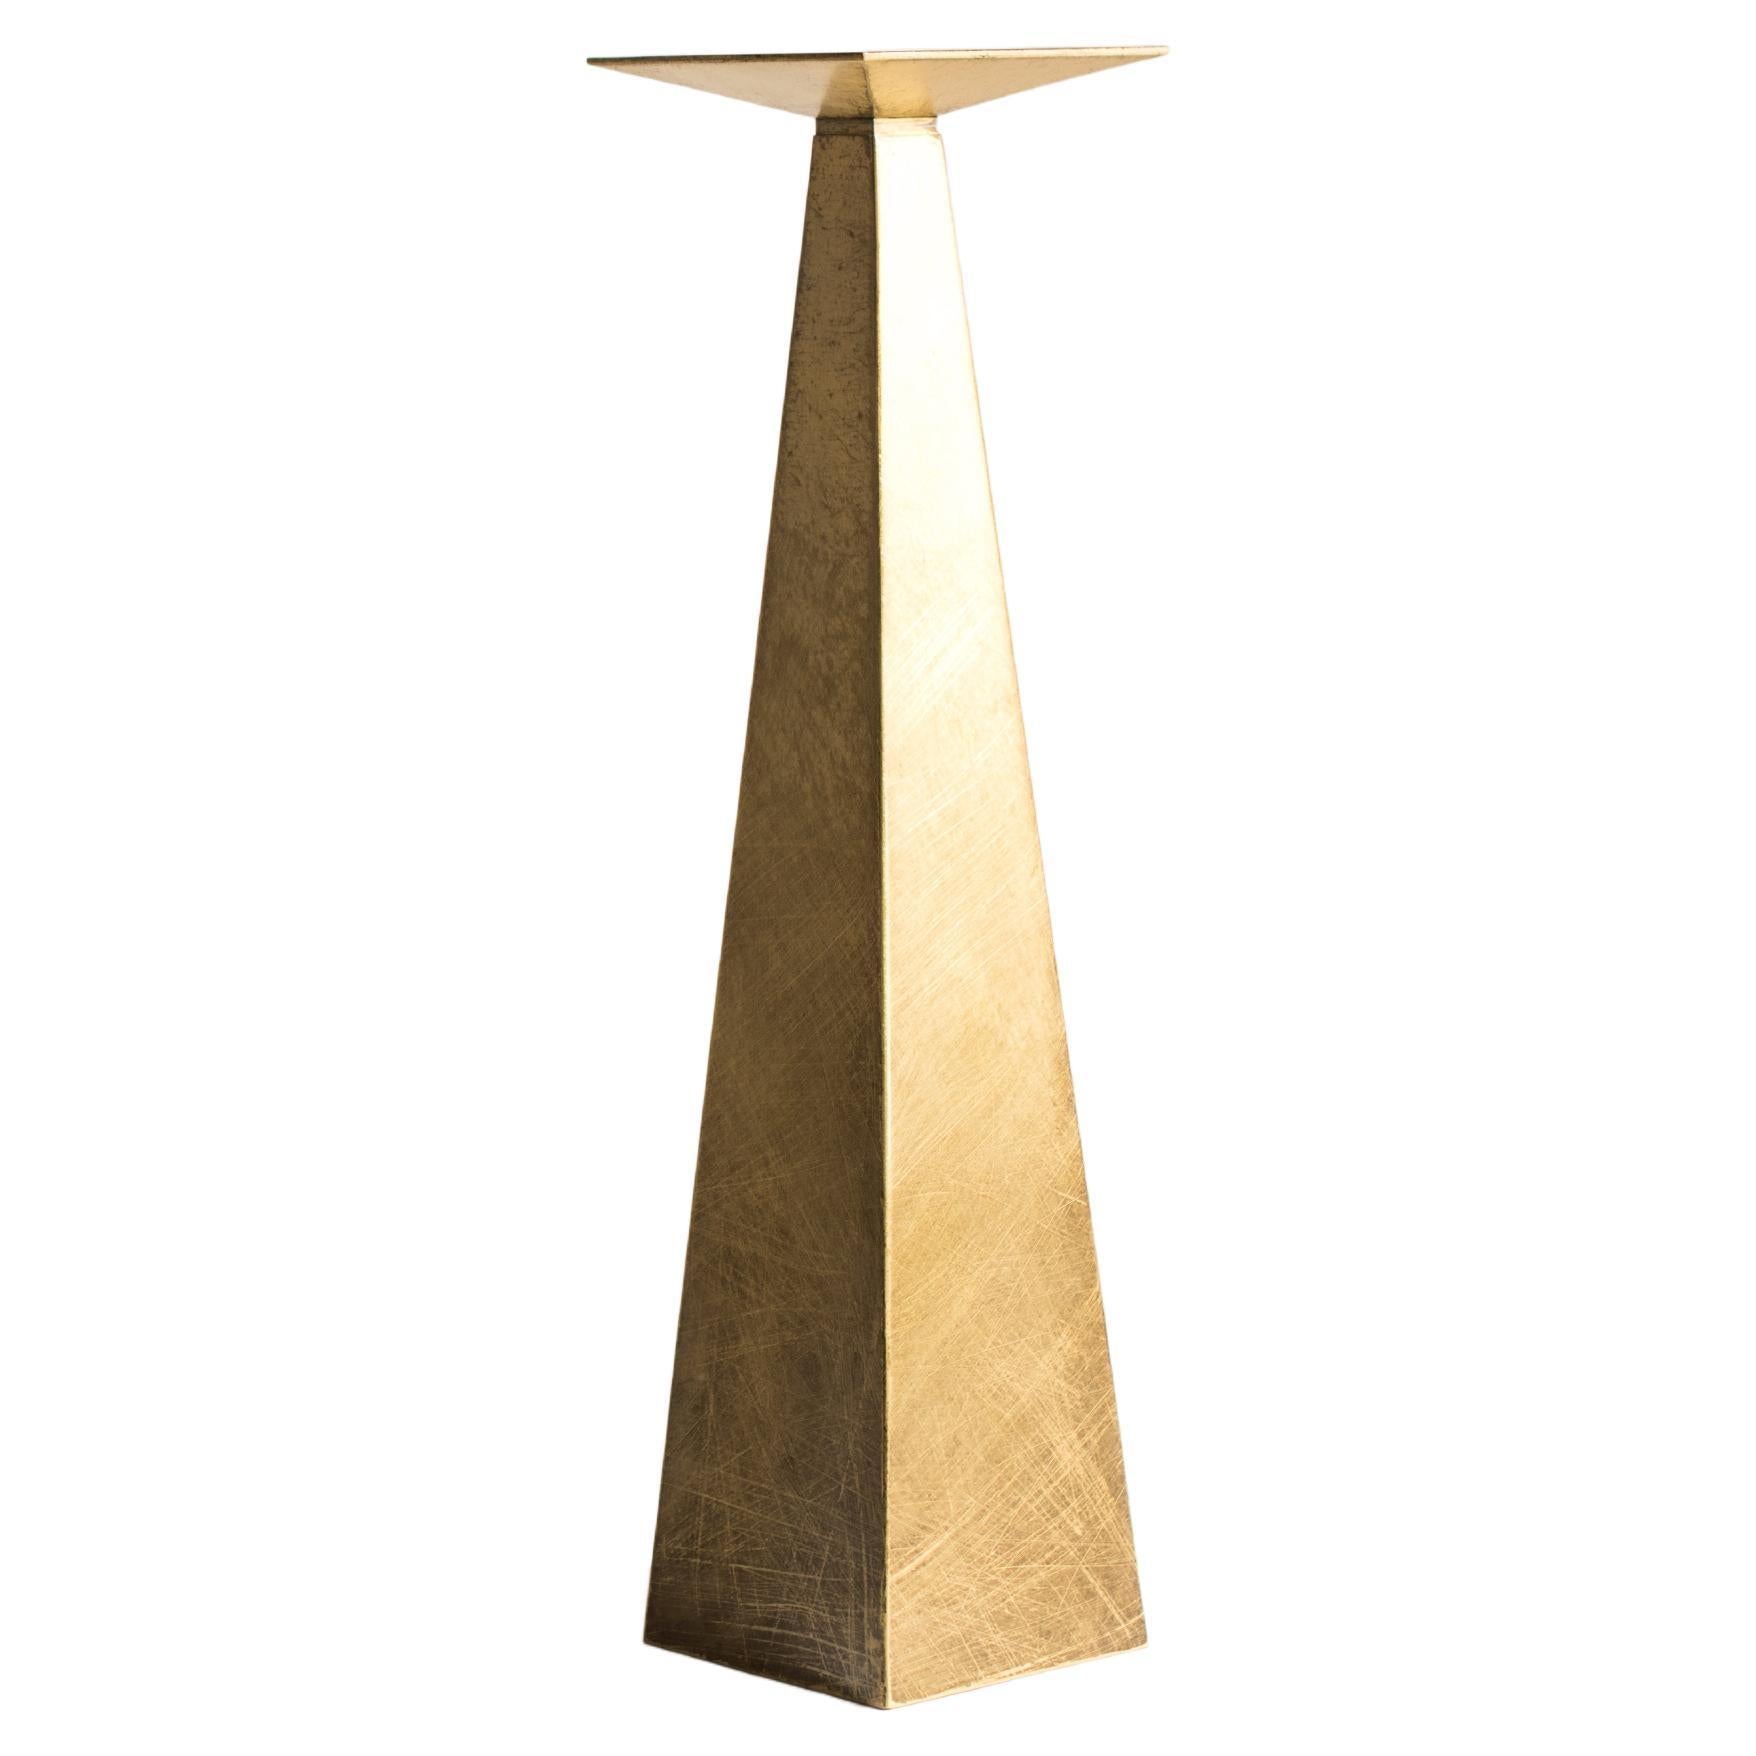 Collide Aged Brass Side Table by Pietro Franceschini